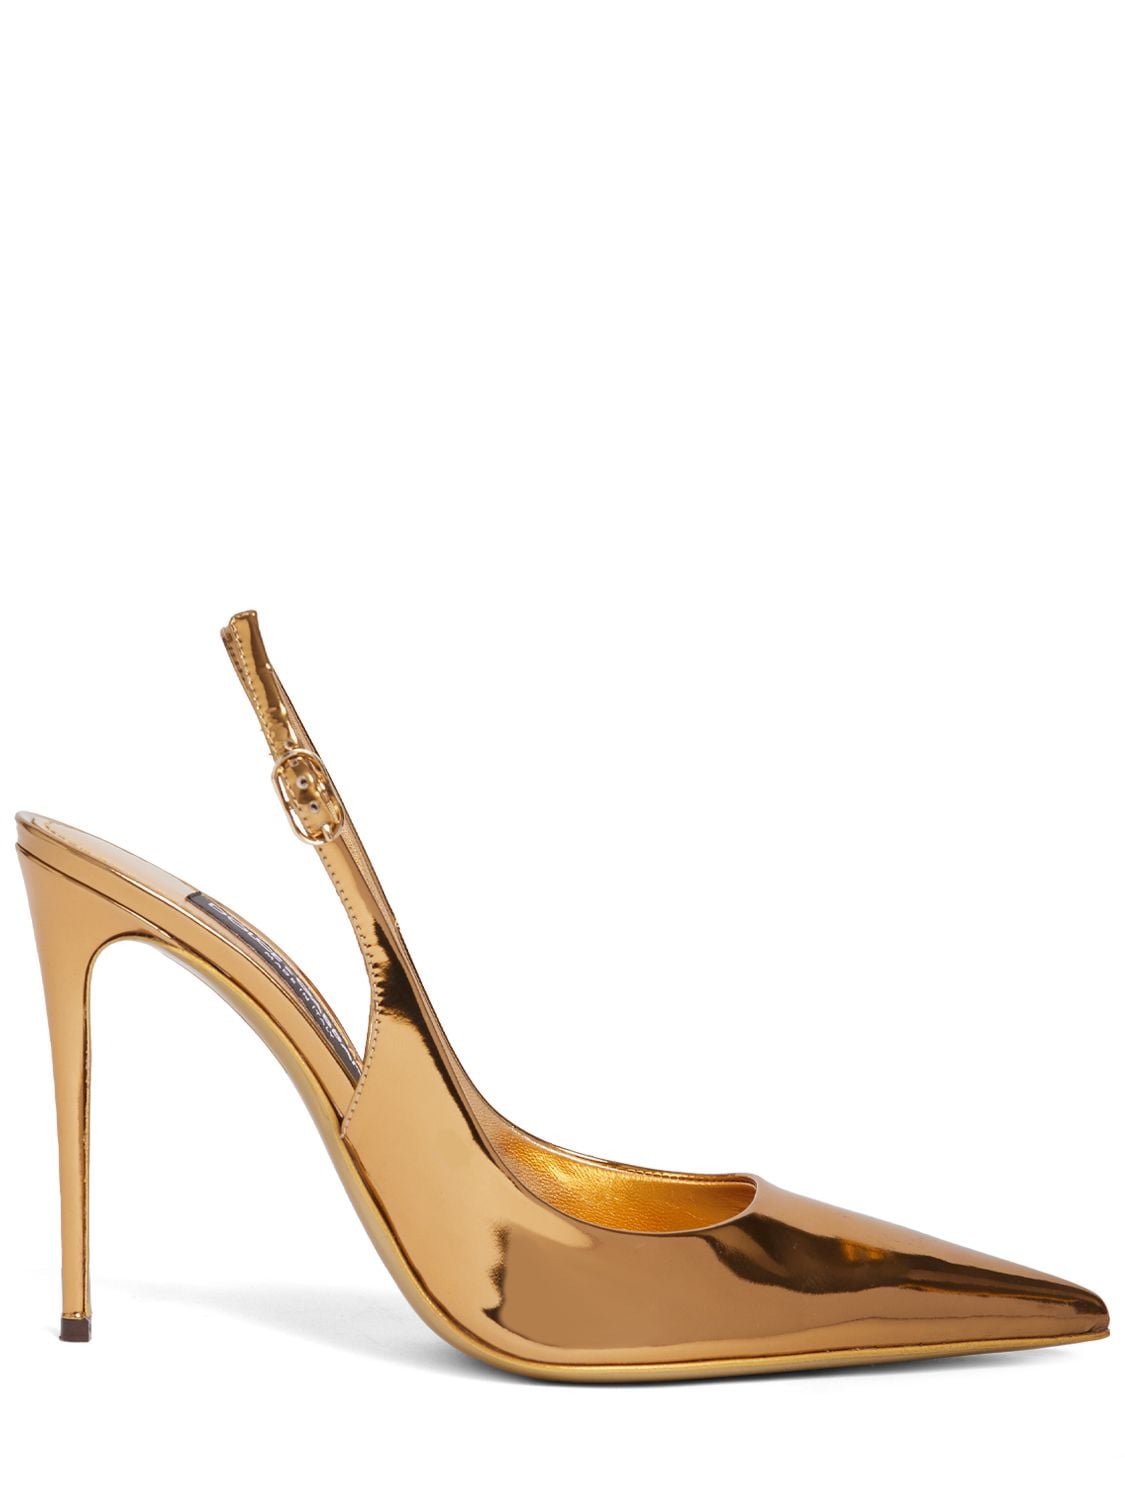 Dolce & Gabbana 90mm Lollo Laminated Leather Slingbacks In Gold